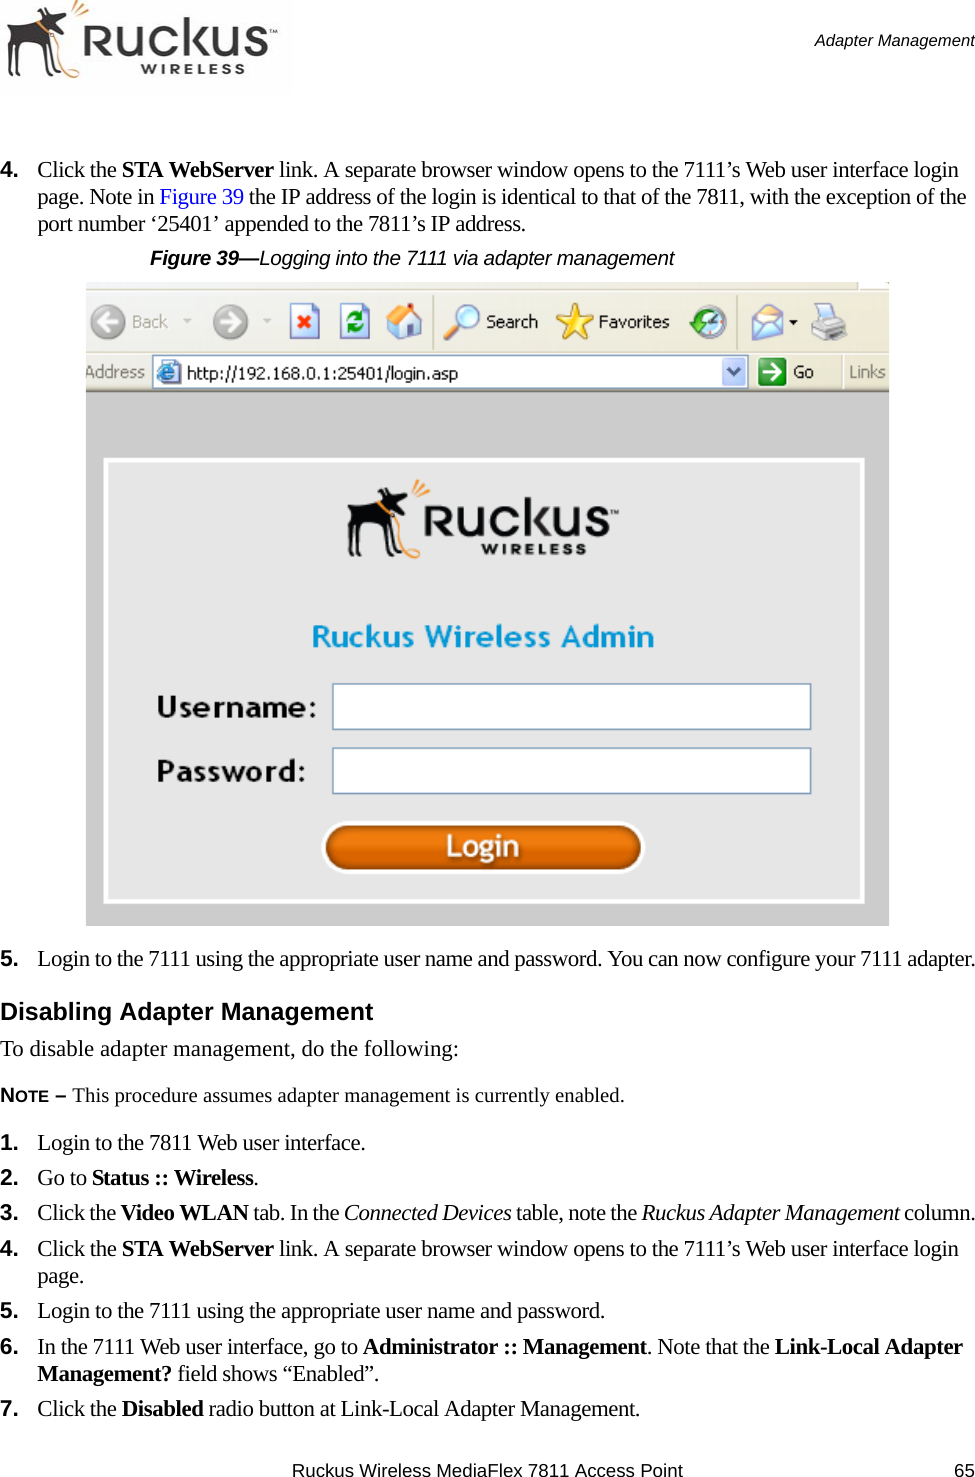 Ruckus Wireless MediaFlex 7811 Access Point 65 Adapter Management4. Click the STA WebServer link. A separate browser window opens to the 7111’s Web user interface login page. Note in Figure 39 the IP address of the login is identical to that of the 7811, with the exception of the port number ‘25401’ appended to the 7811’s IP address.Figure 39—Logging into the 7111 via adapter management5. Login to the 7111 using the appropriate user name and password. You can now configure your 7111 adapter.Disabling Adapter ManagementTo disable adapter management, do the following:NOTE – This procedure assumes adapter management is currently enabled.1. Login to the 7811 Web user interface.2. Go to Status :: Wireless.3. Click the Video WLAN tab. In the Connected Devices table, note the Ruckus Adapter Management column.4. Click the STA WebServer link. A separate browser window opens to the 7111’s Web user interface login page. 5. Login to the 7111 using the appropriate user name and password.6. In the 7111 Web user interface, go to Administrator :: Management. Note that the Link-Local Adapter Management? field shows “Enabled”.7. Click the Disabled radio button at Link-Local Adapter Management.